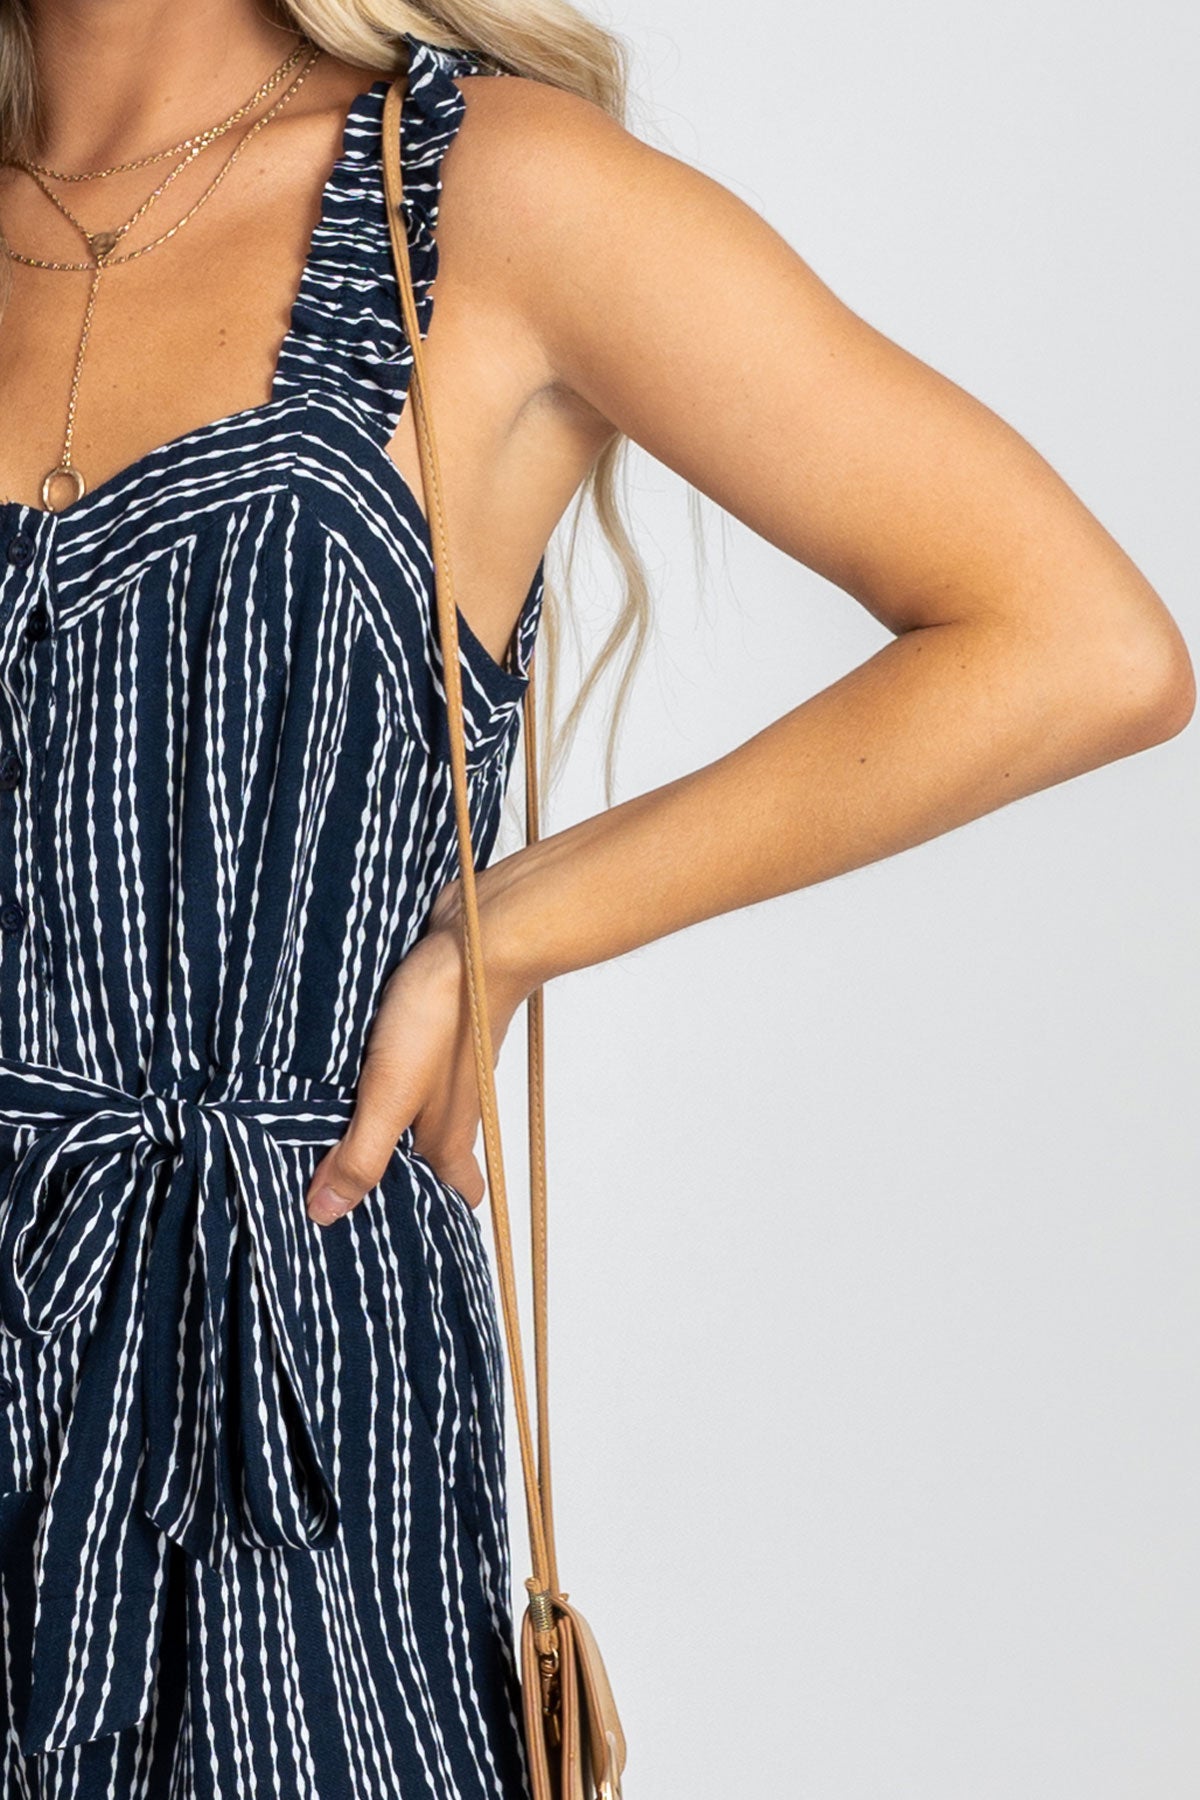 Women's Spring and Summer Striped Rompers